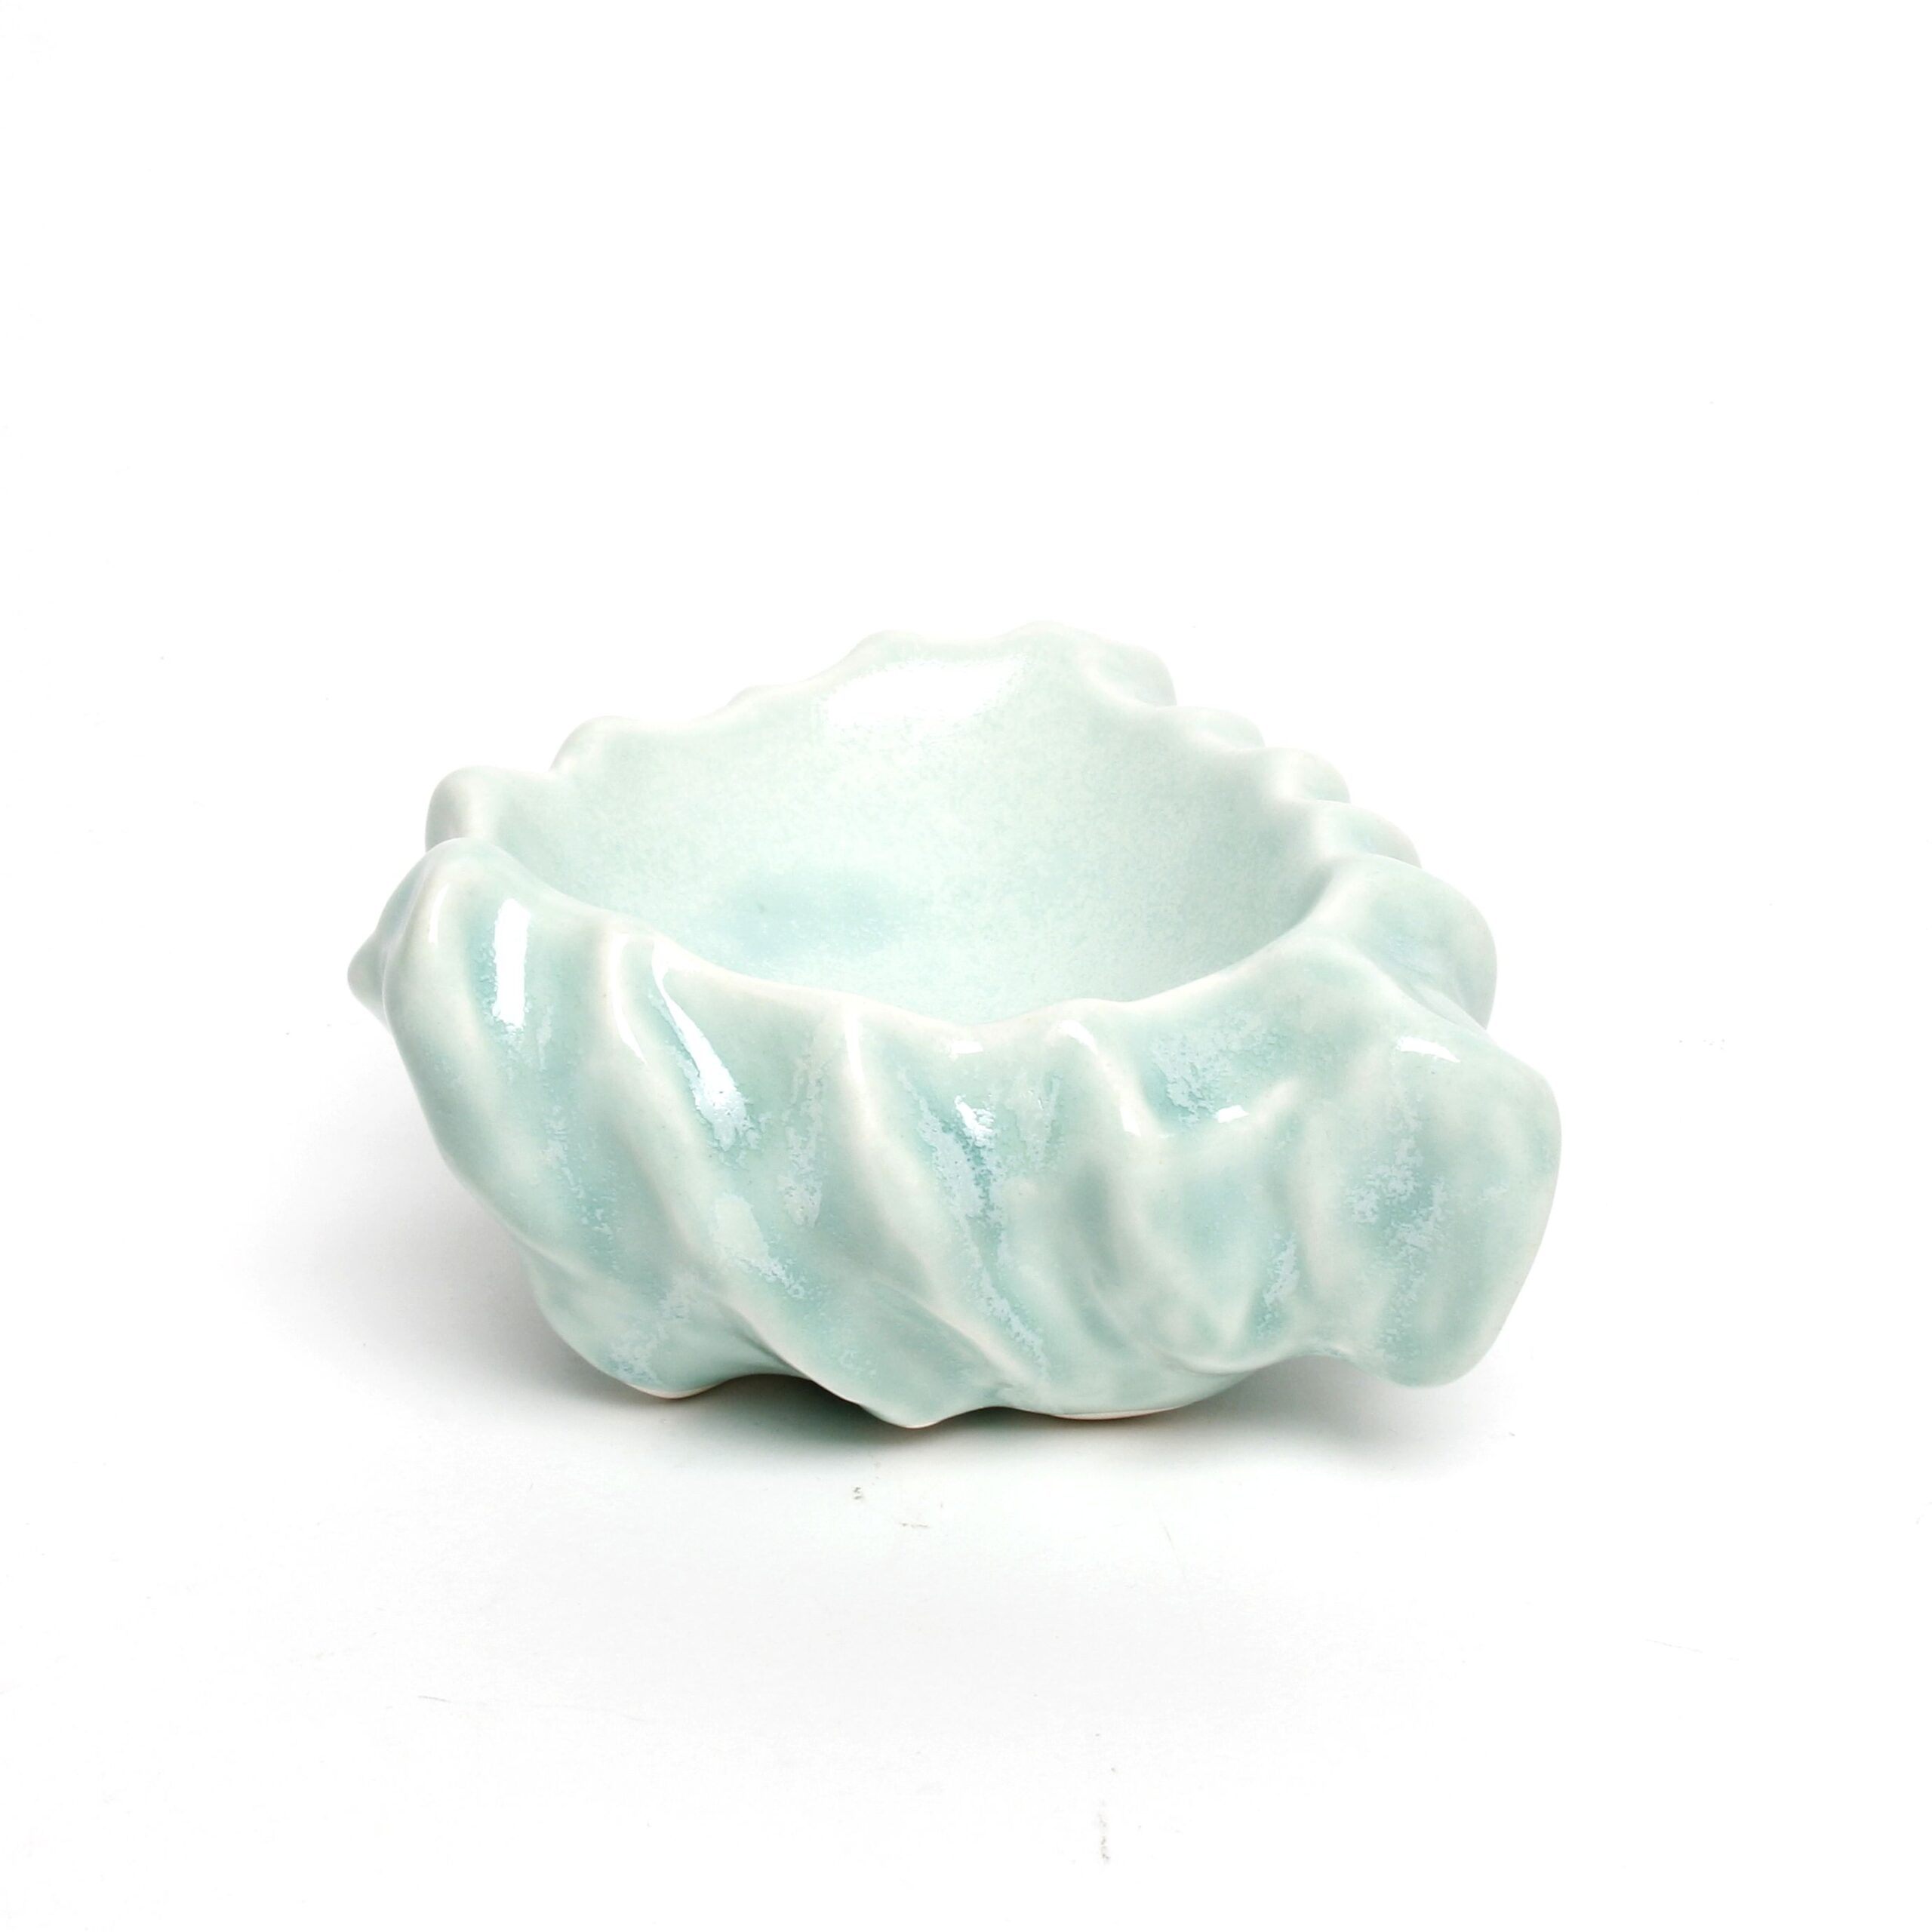 William Lee: Green Triangle Bowl Product Image 1 of 3